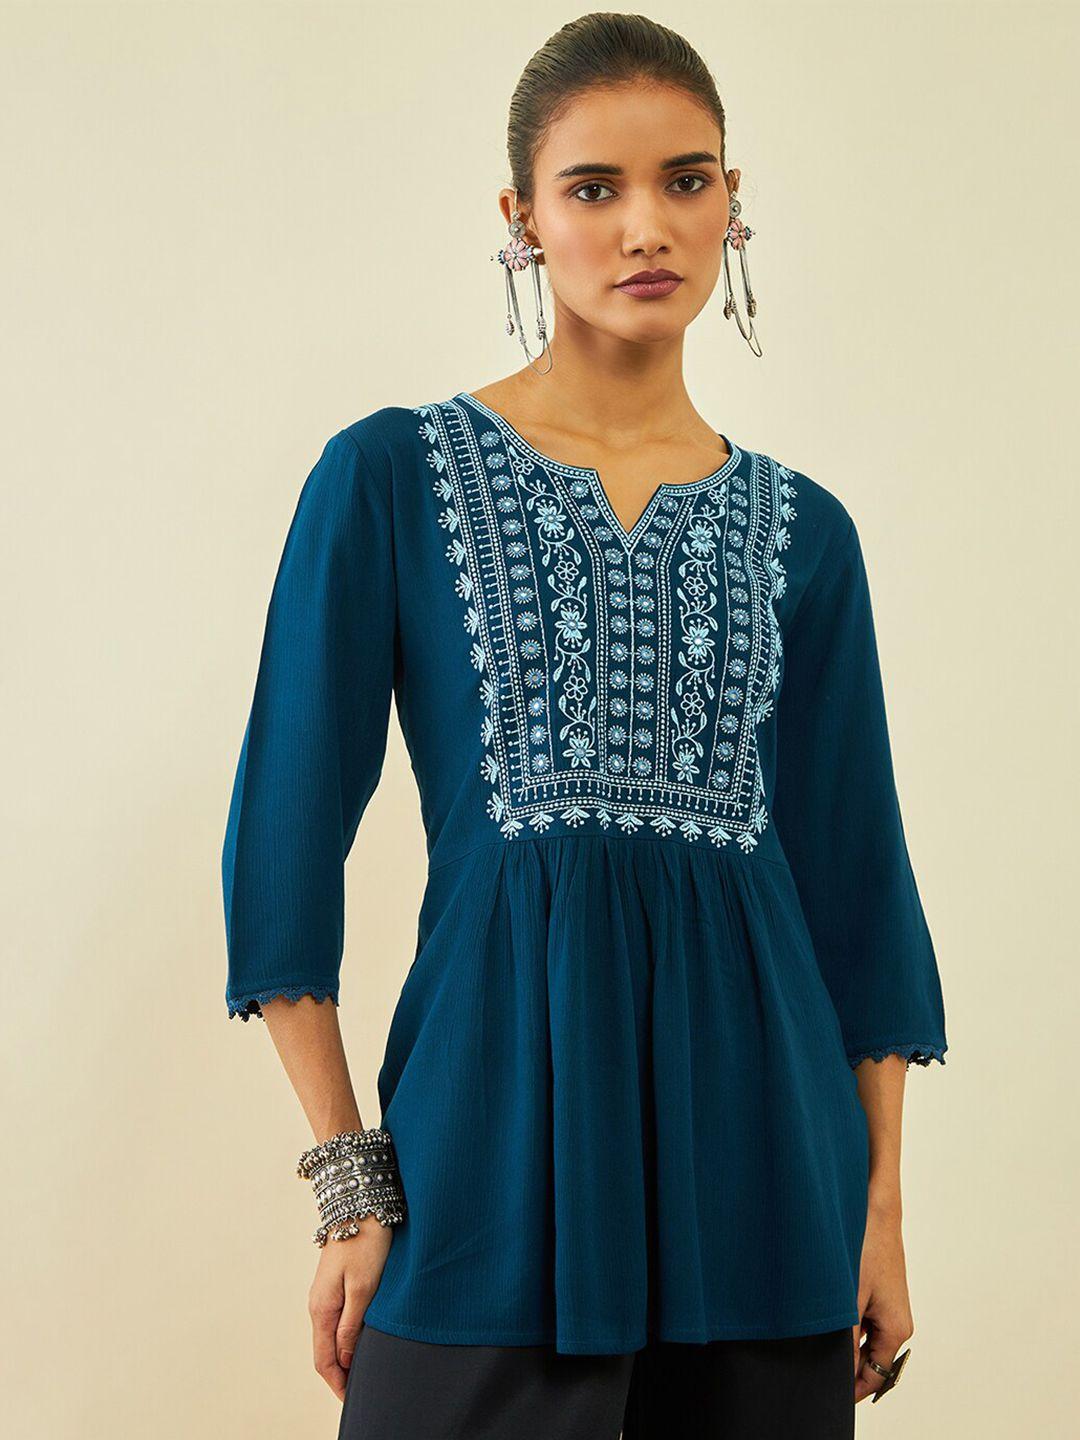 soch-teal-ethnic-motifs-embroidered-mirror-work-crepe-tunic